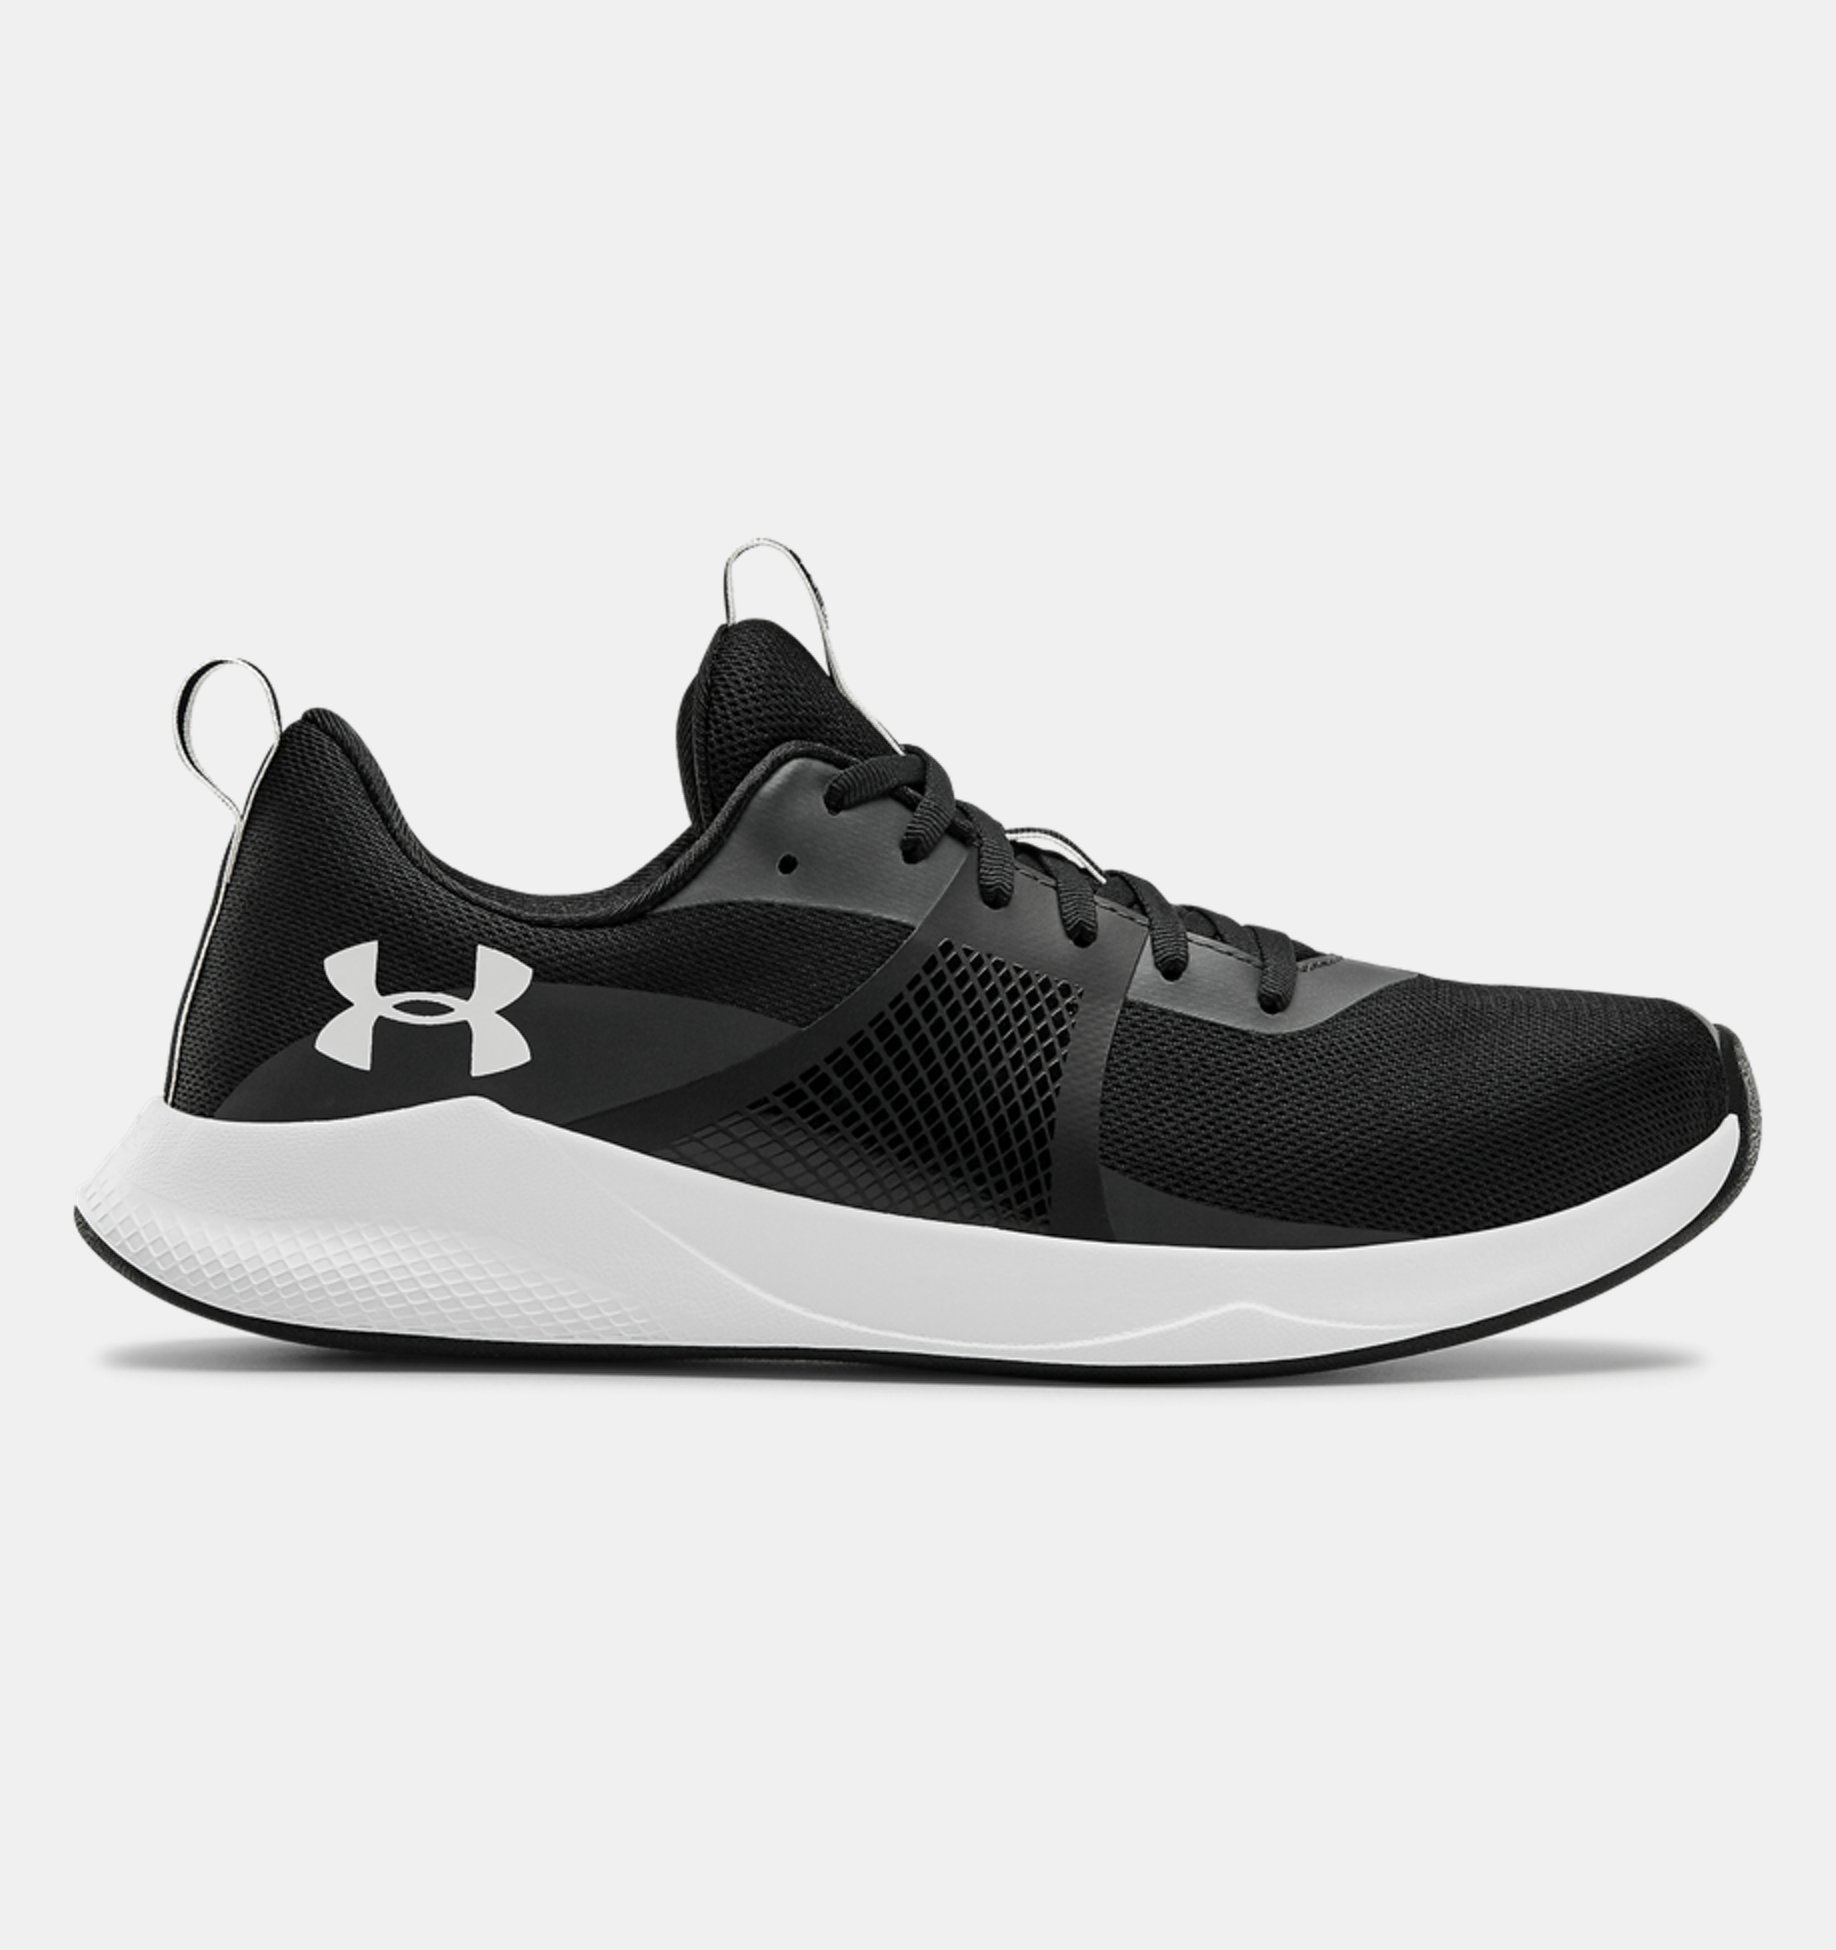 Under Armour Women’s Charged Aurora Cross Trainer